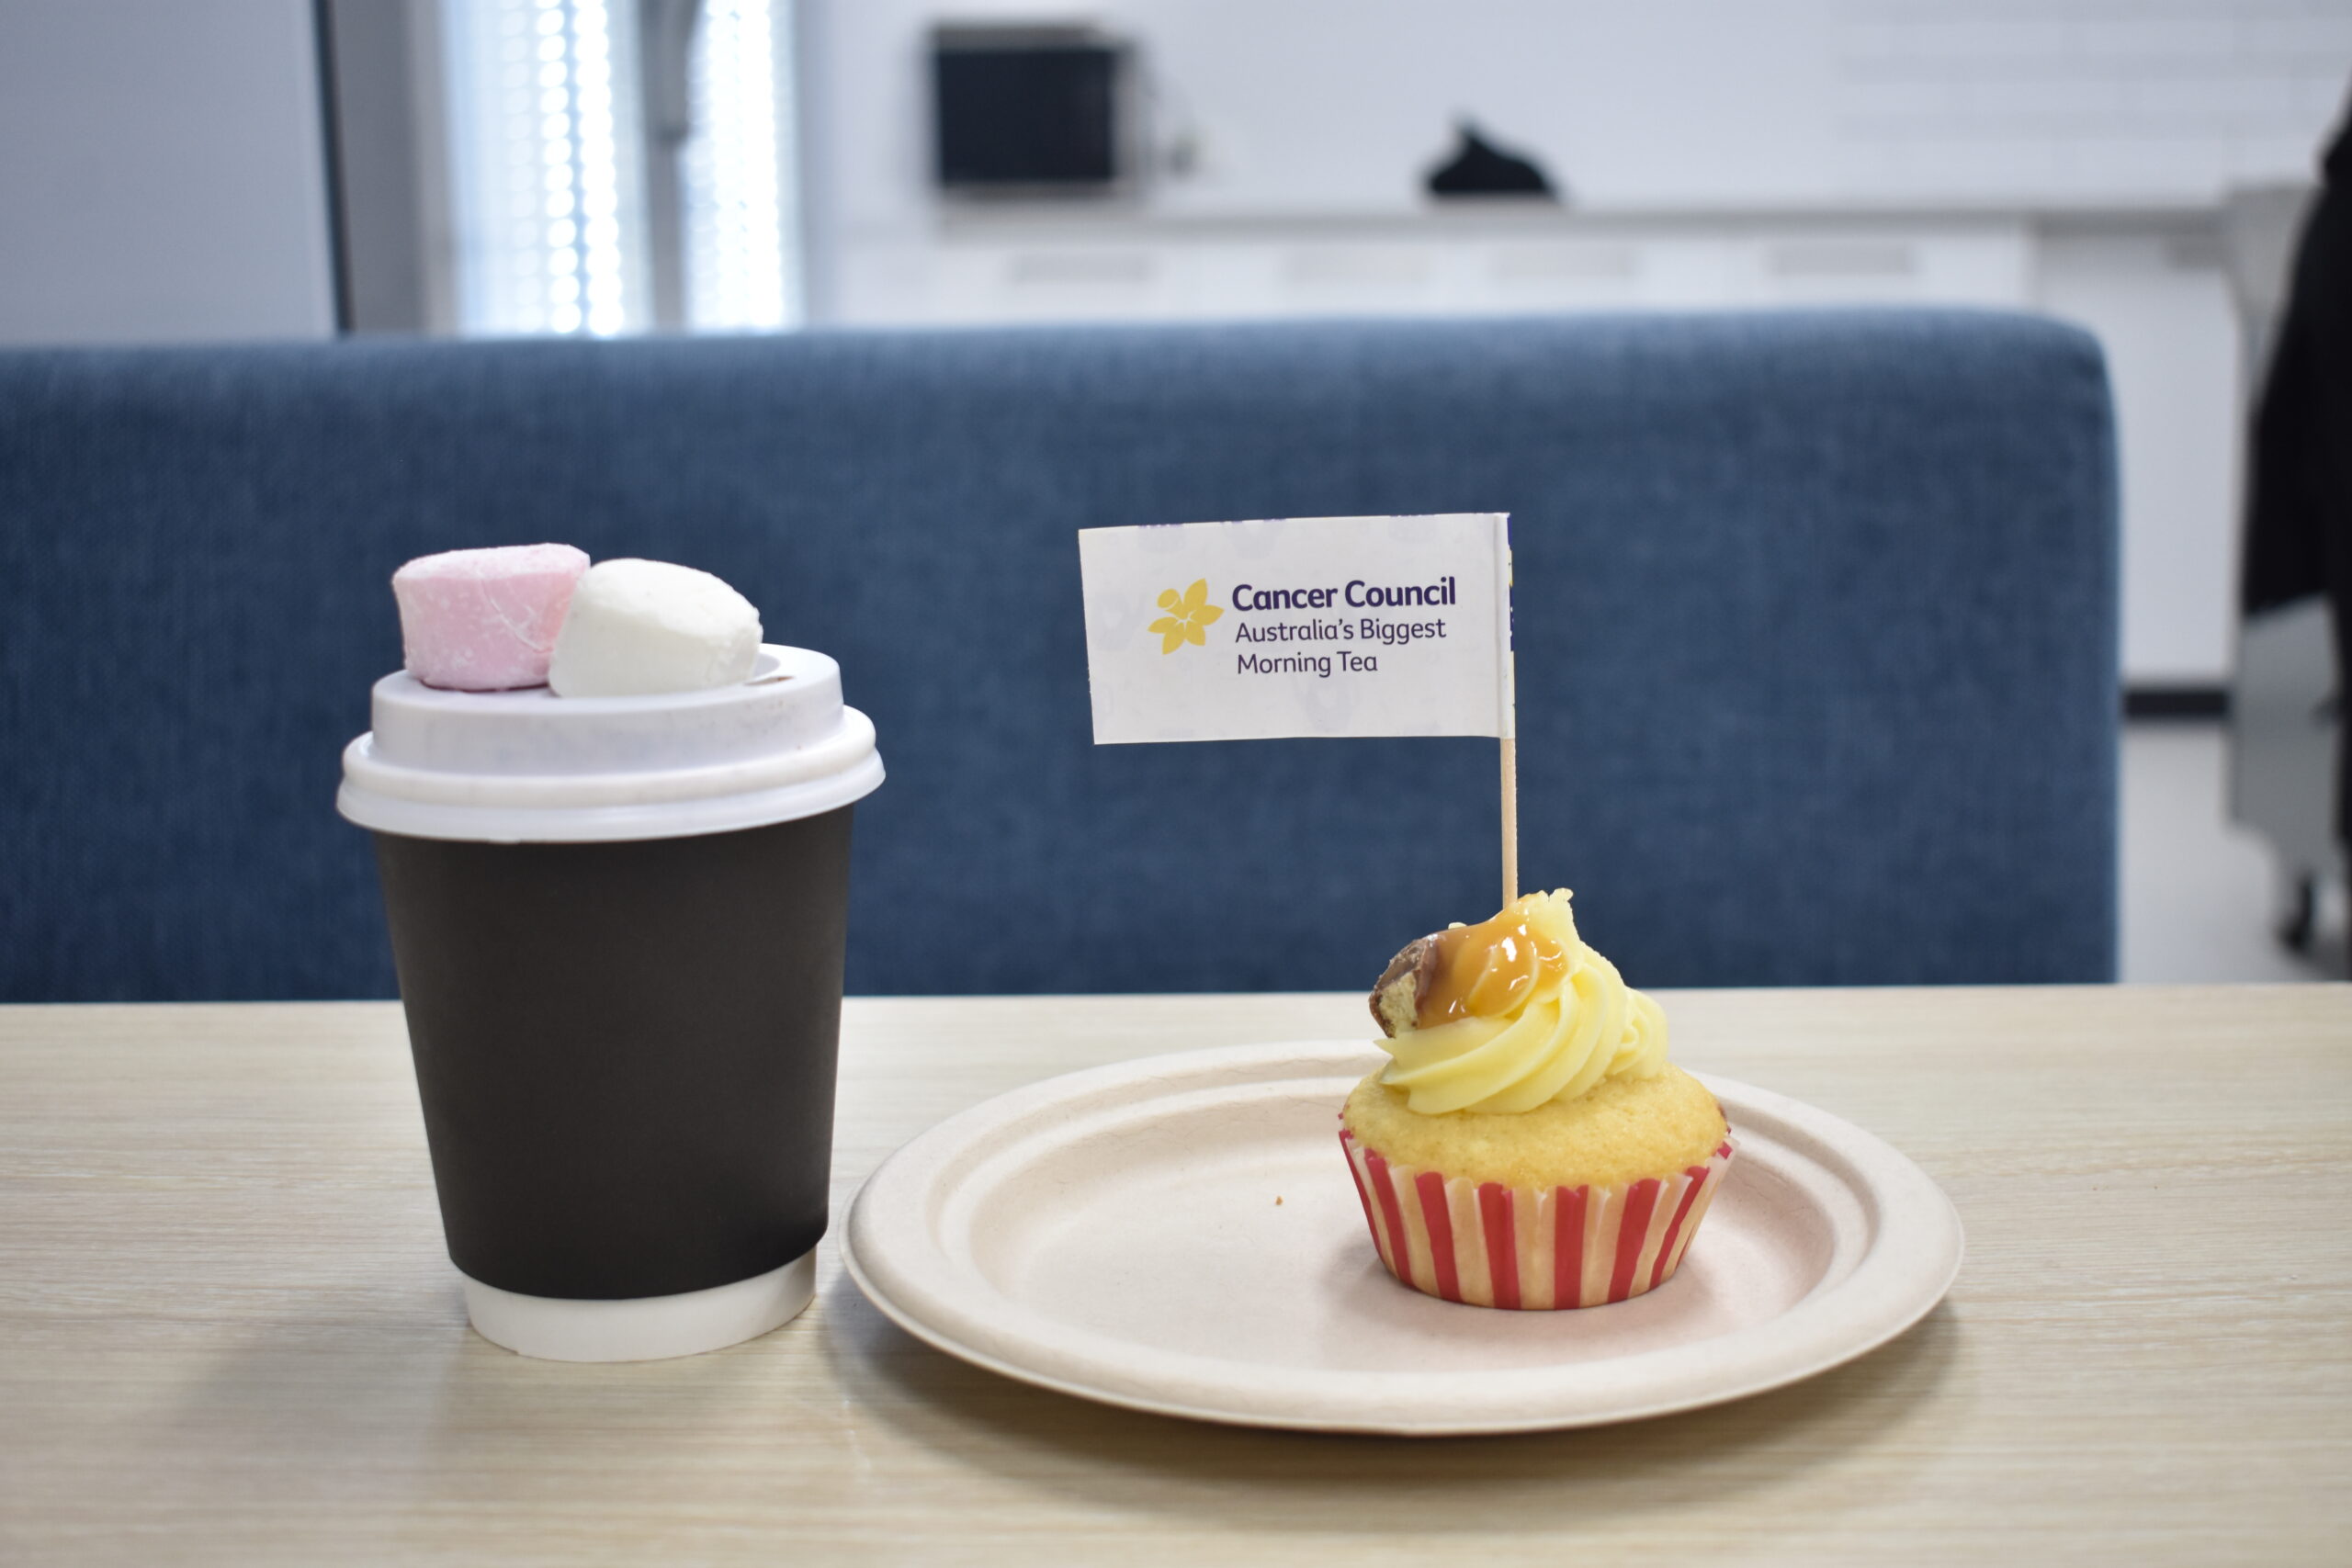 You are currently viewing The Biggest Morning Tea for Cancer Council